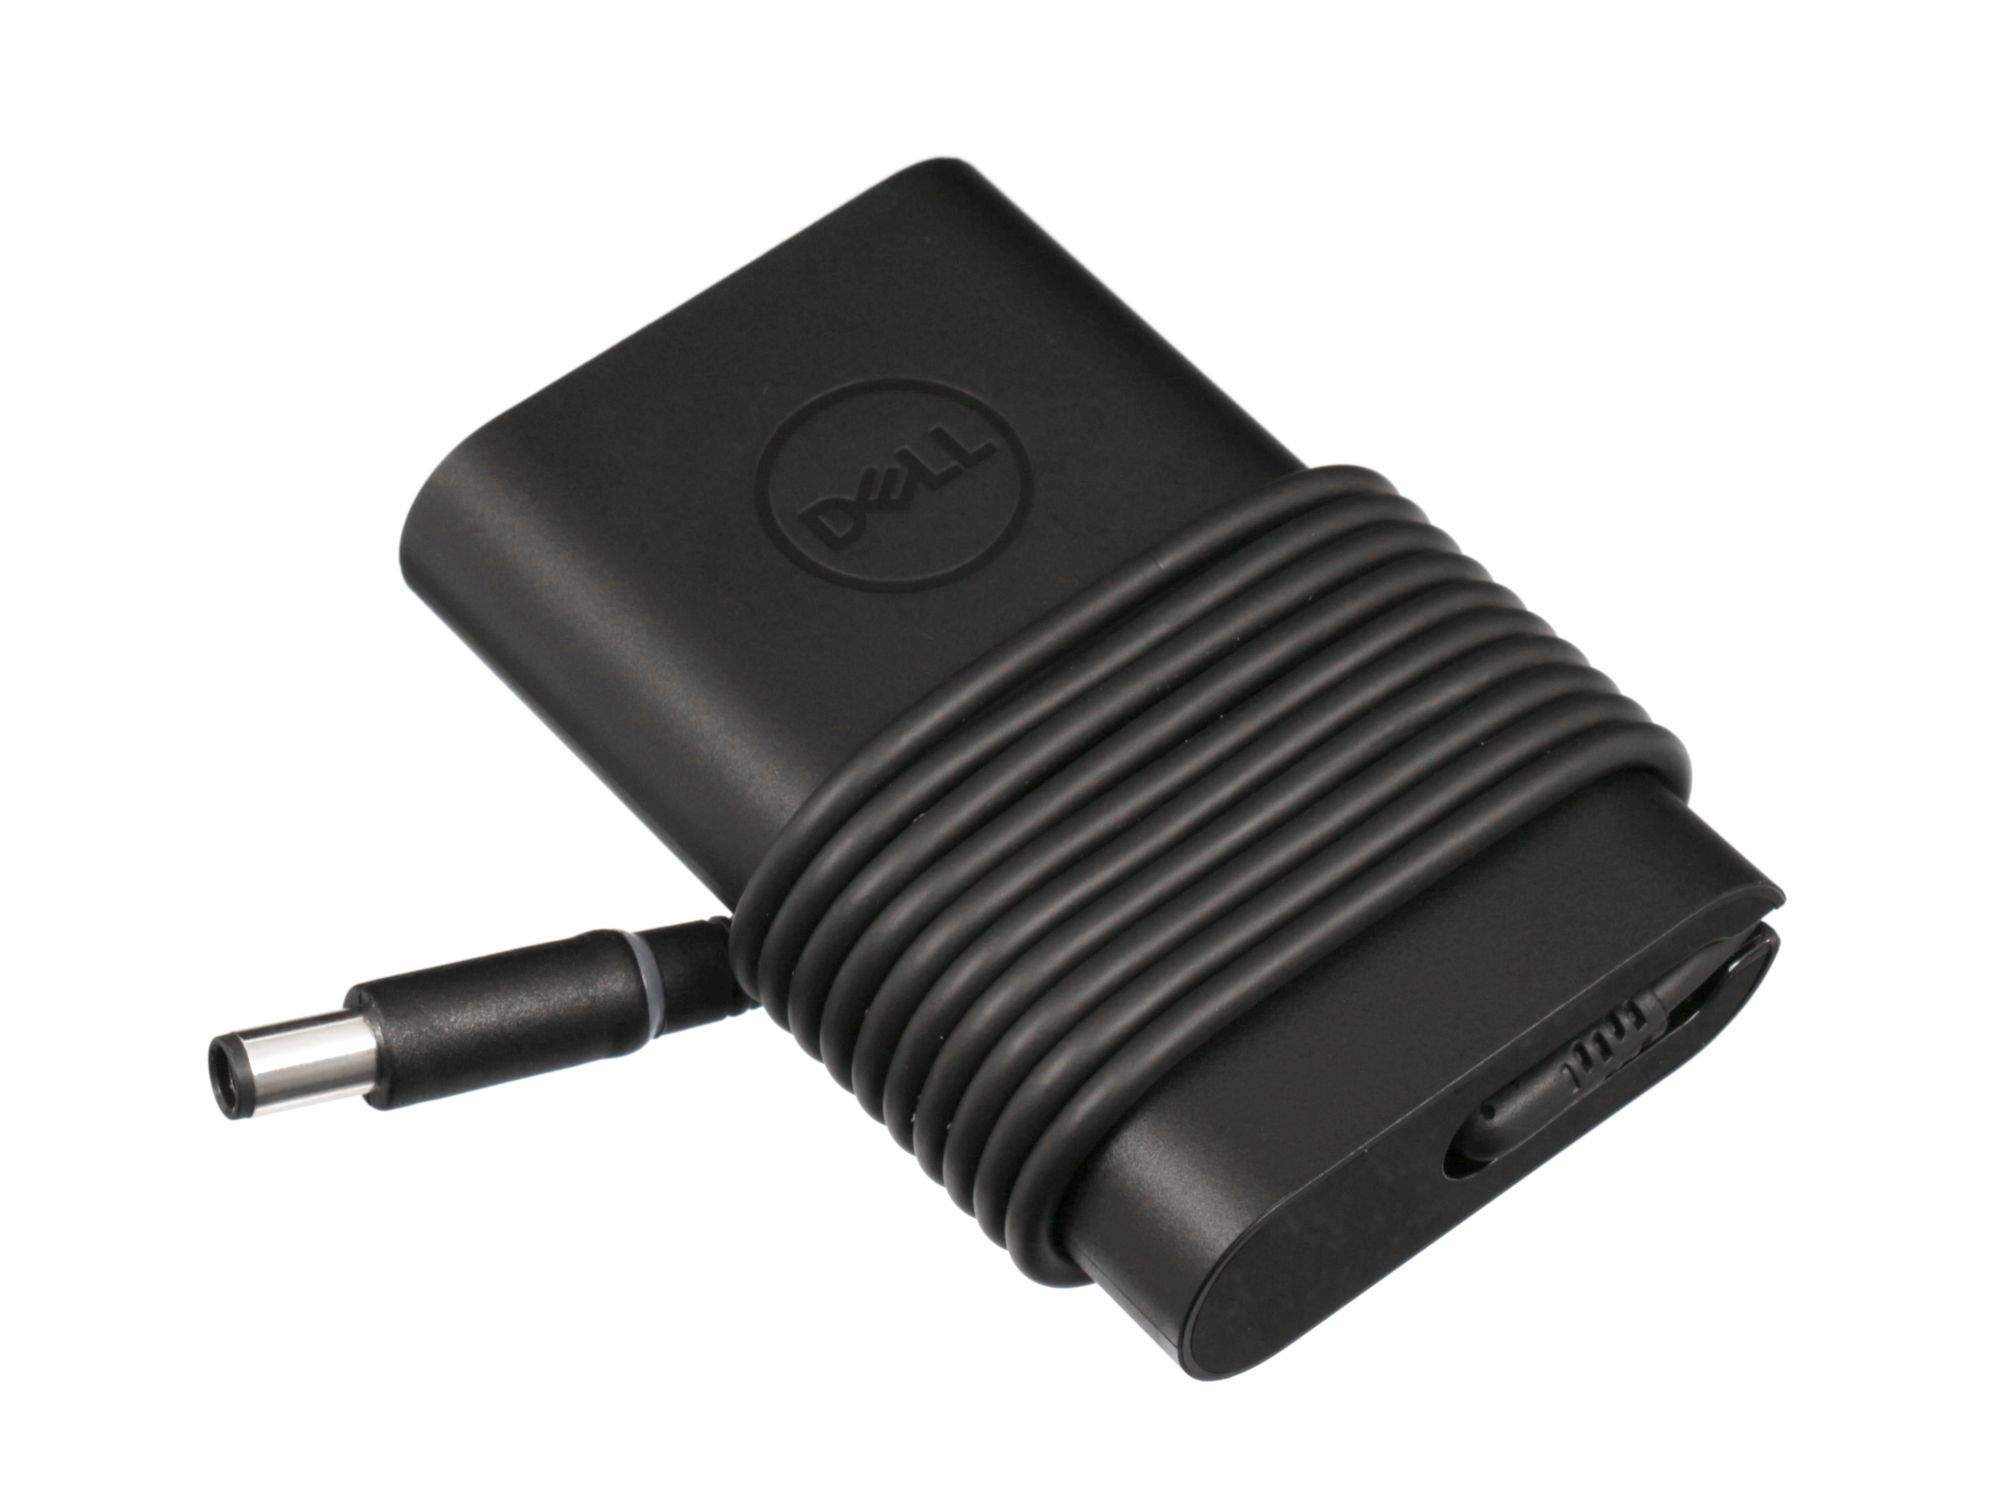 DELL 65W 3 Prong AC Adapter with EU Power Cord